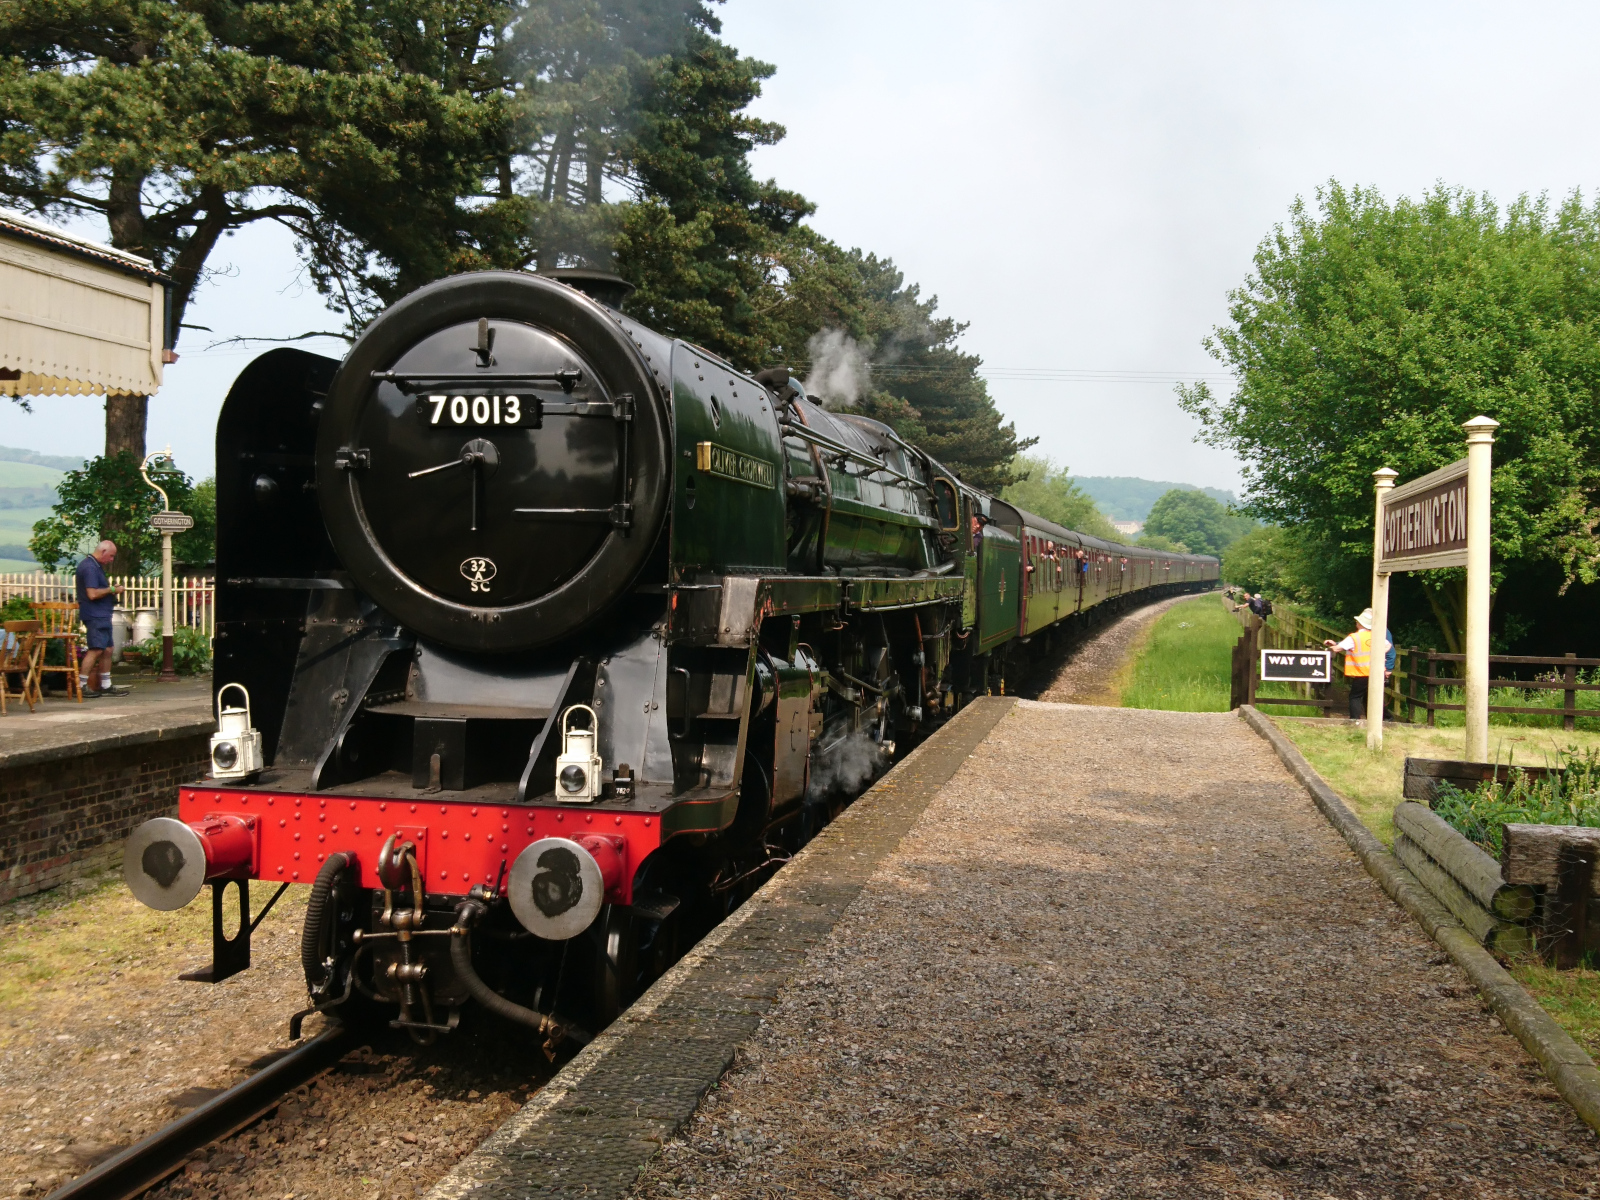 A steam train stopped at Gotherington station